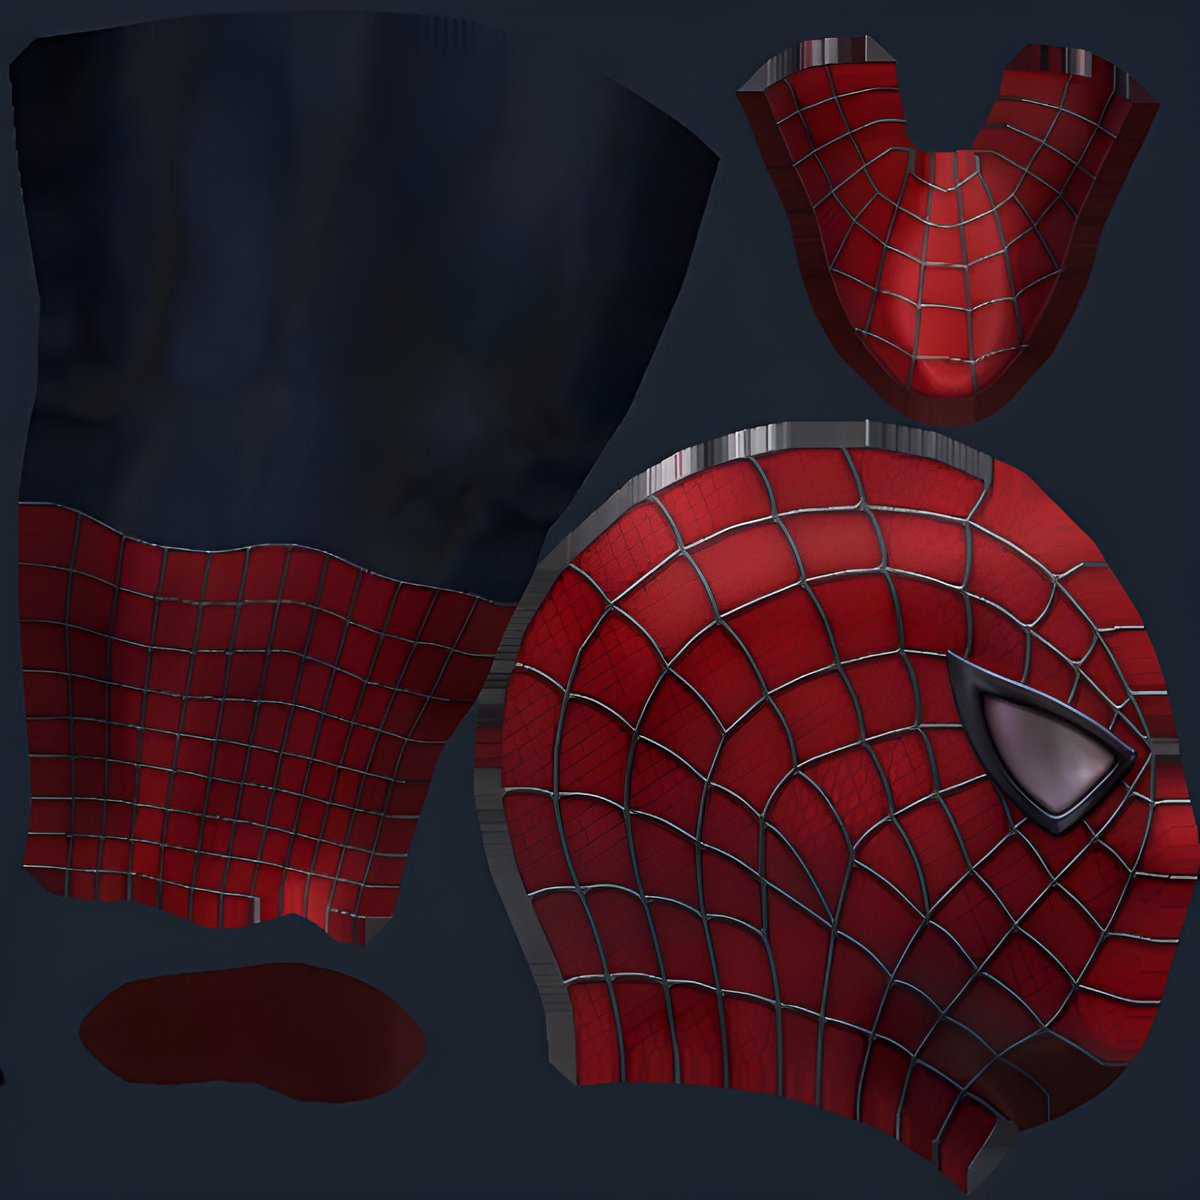 RT @EARTH_96283: AI upscale of the textures used in the Wii port of the cancelled Spider-Man 4 tie-in game https://t.co/as2nW09hj2